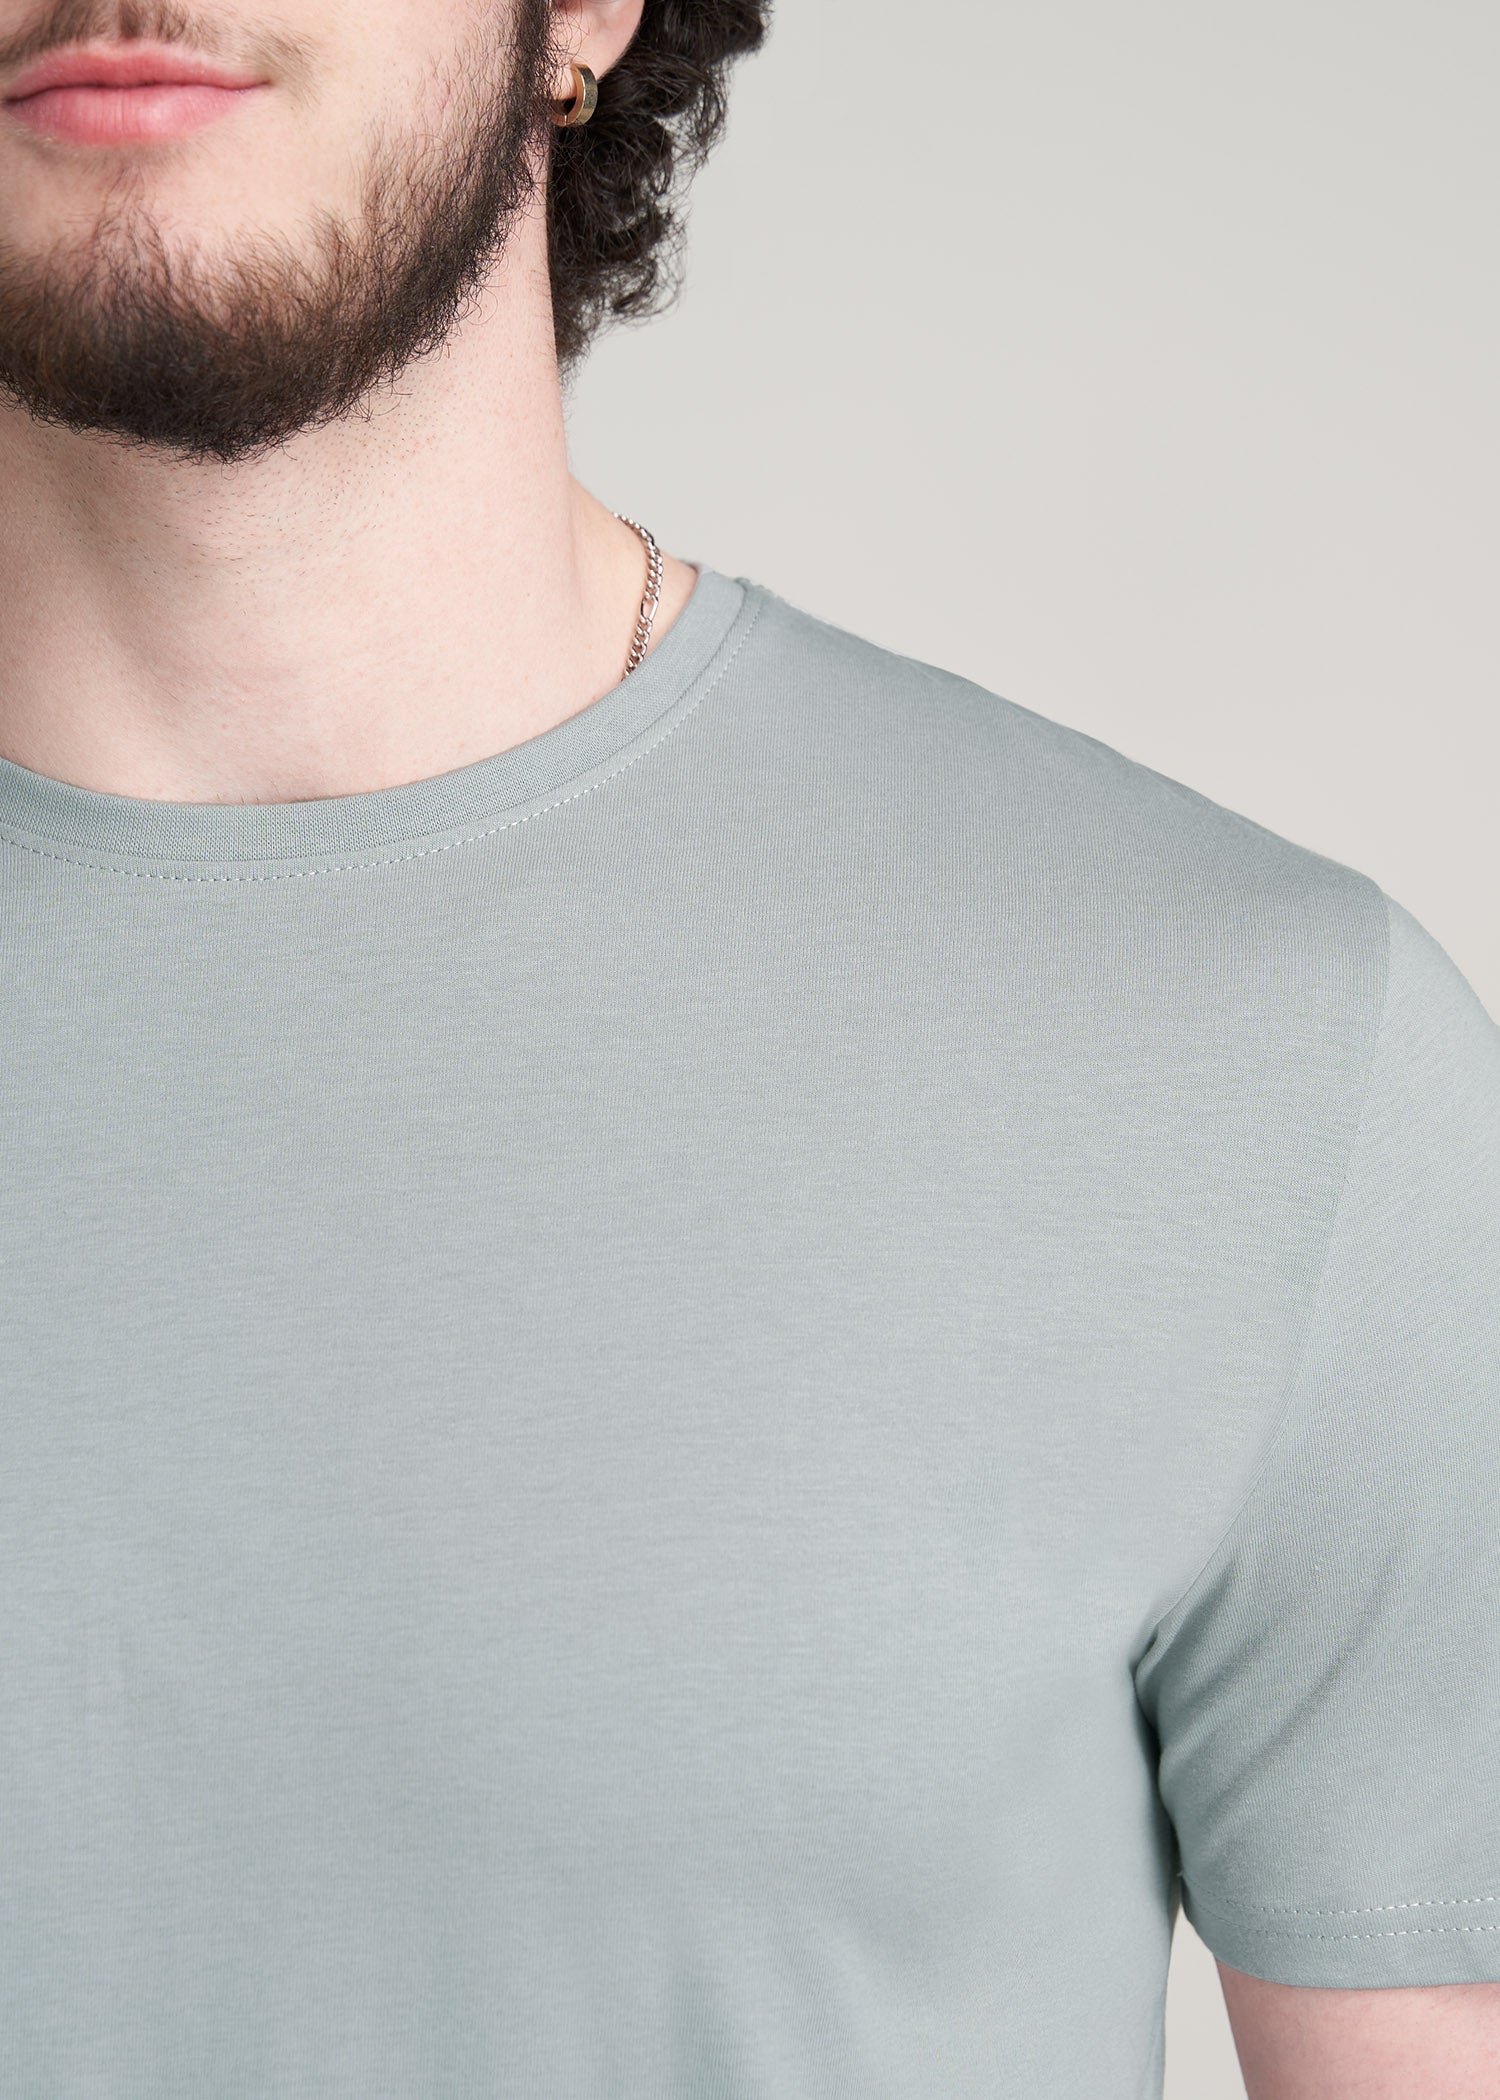 Stretch Cotton MODERN-FIT T-Shirt for Tall Men in Skyline Grey